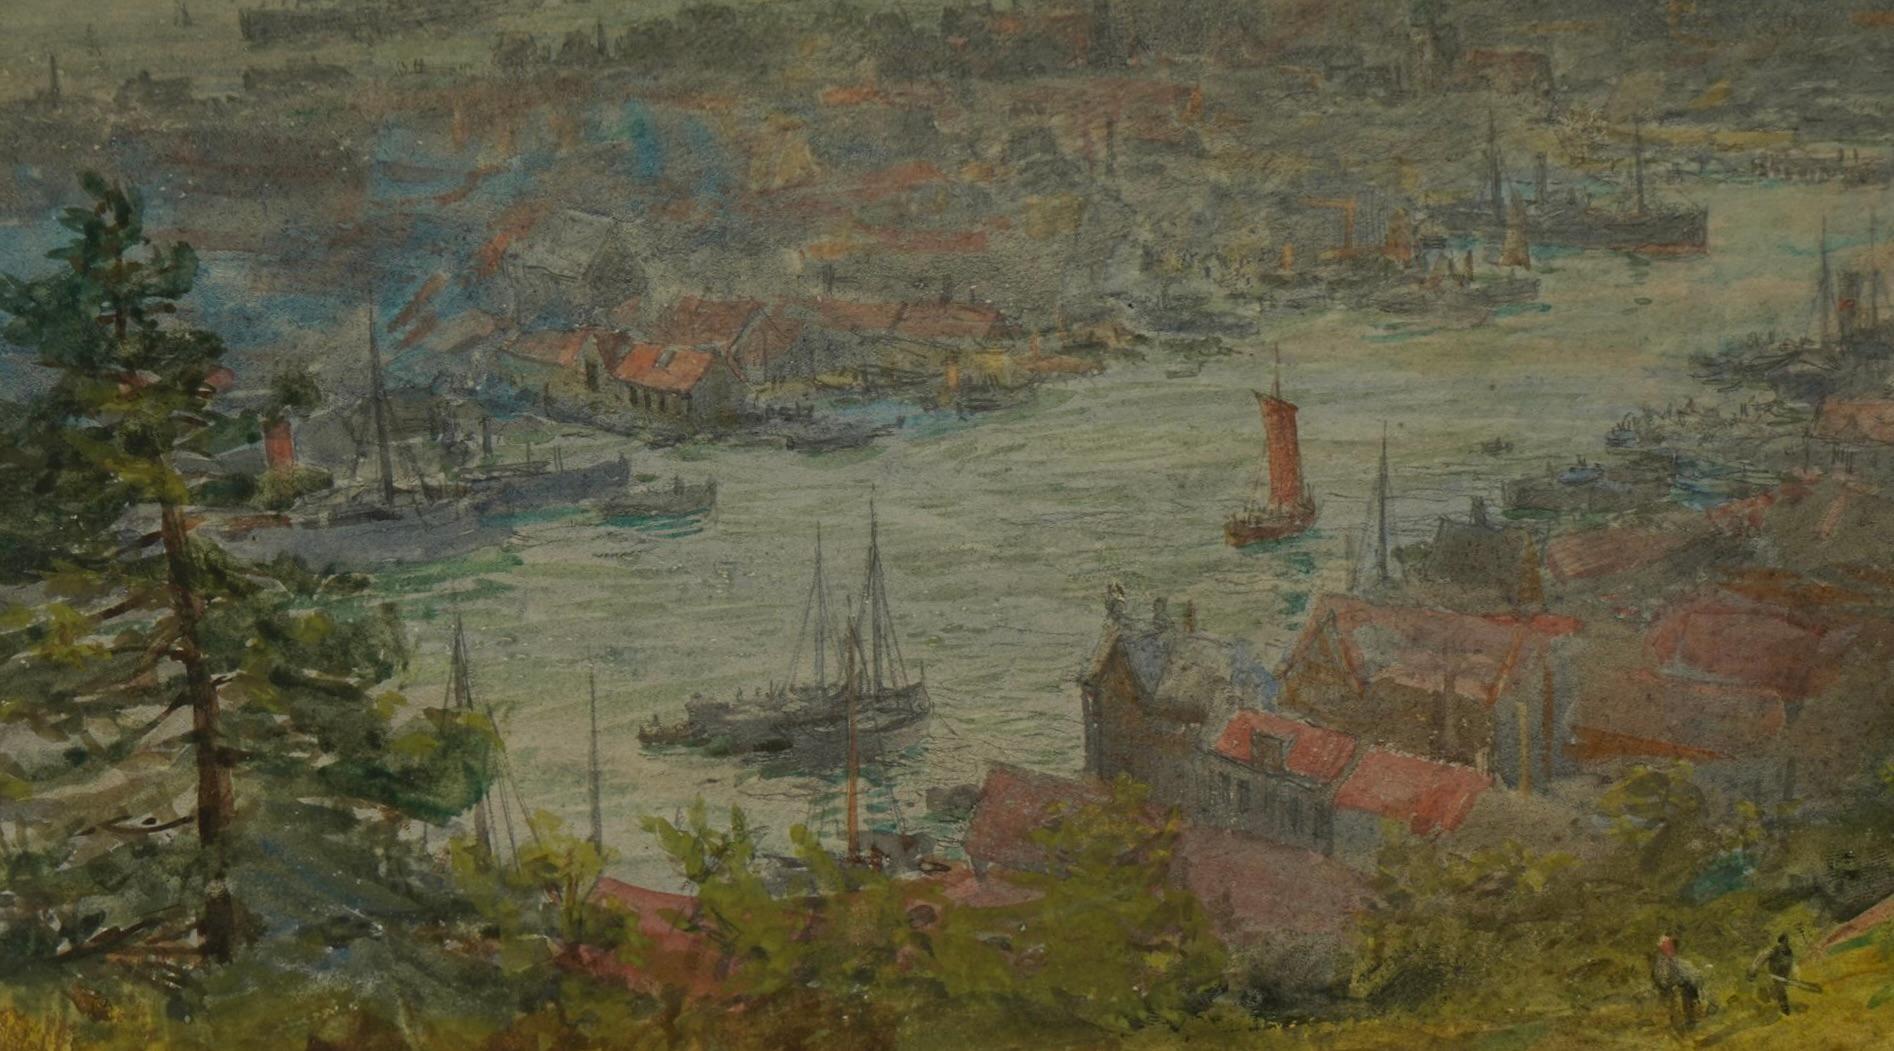 Bergen, Norway -  Ships in The Harbor - Houses & Figures - circa 1906 - English School Art by William Lionel Wyllie, R.A., R.I., R.E.